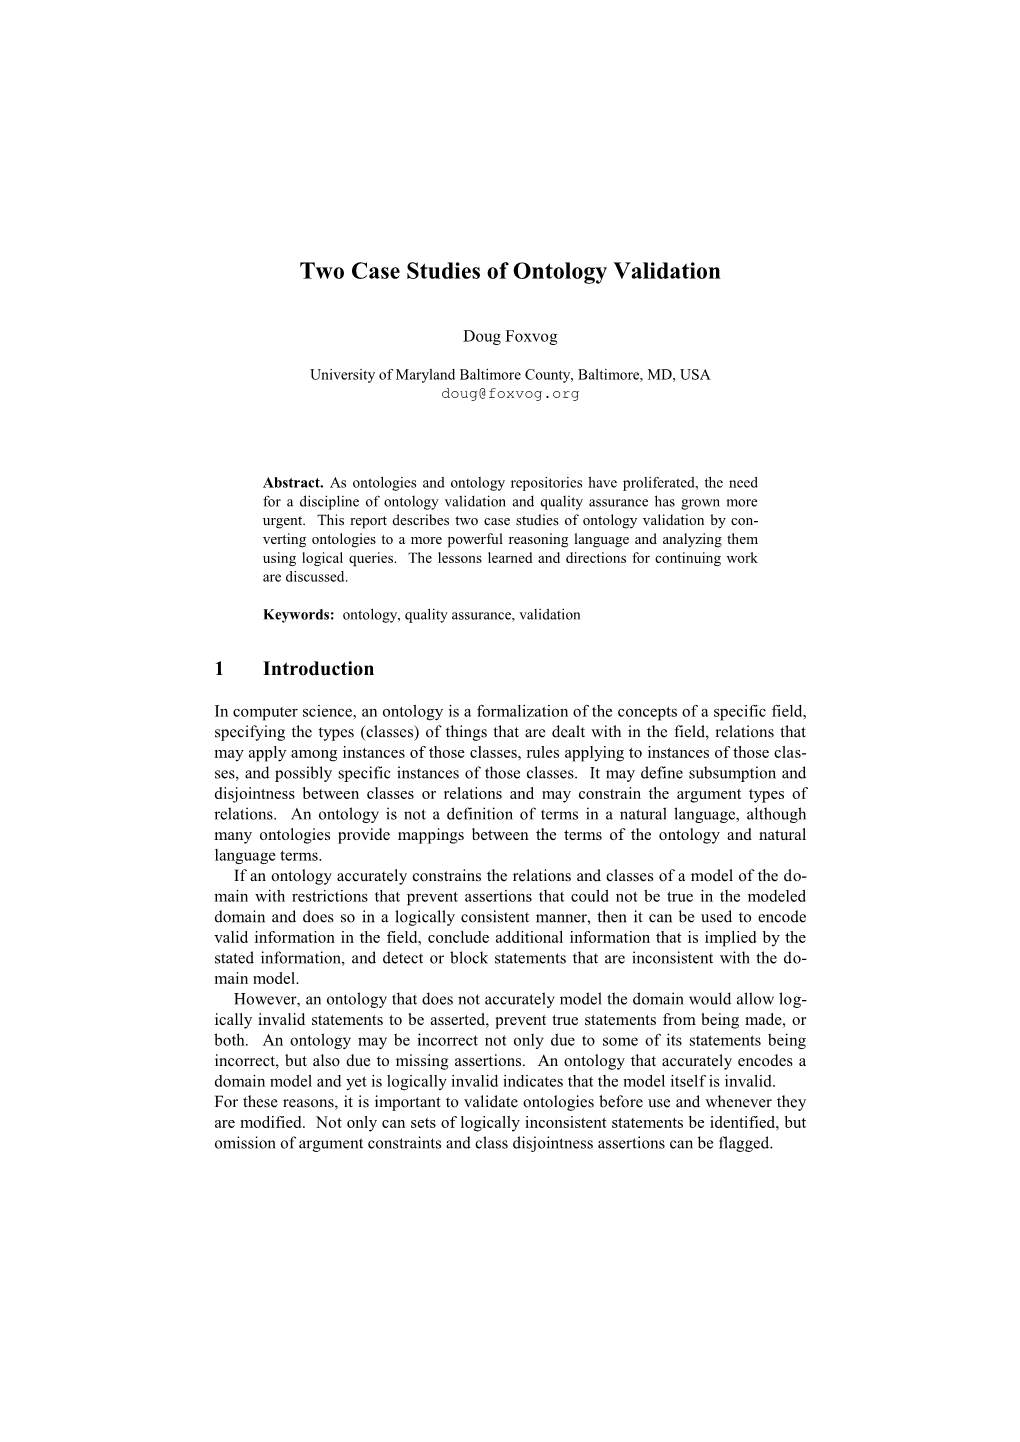 Two Case Studies of Ontology Validation